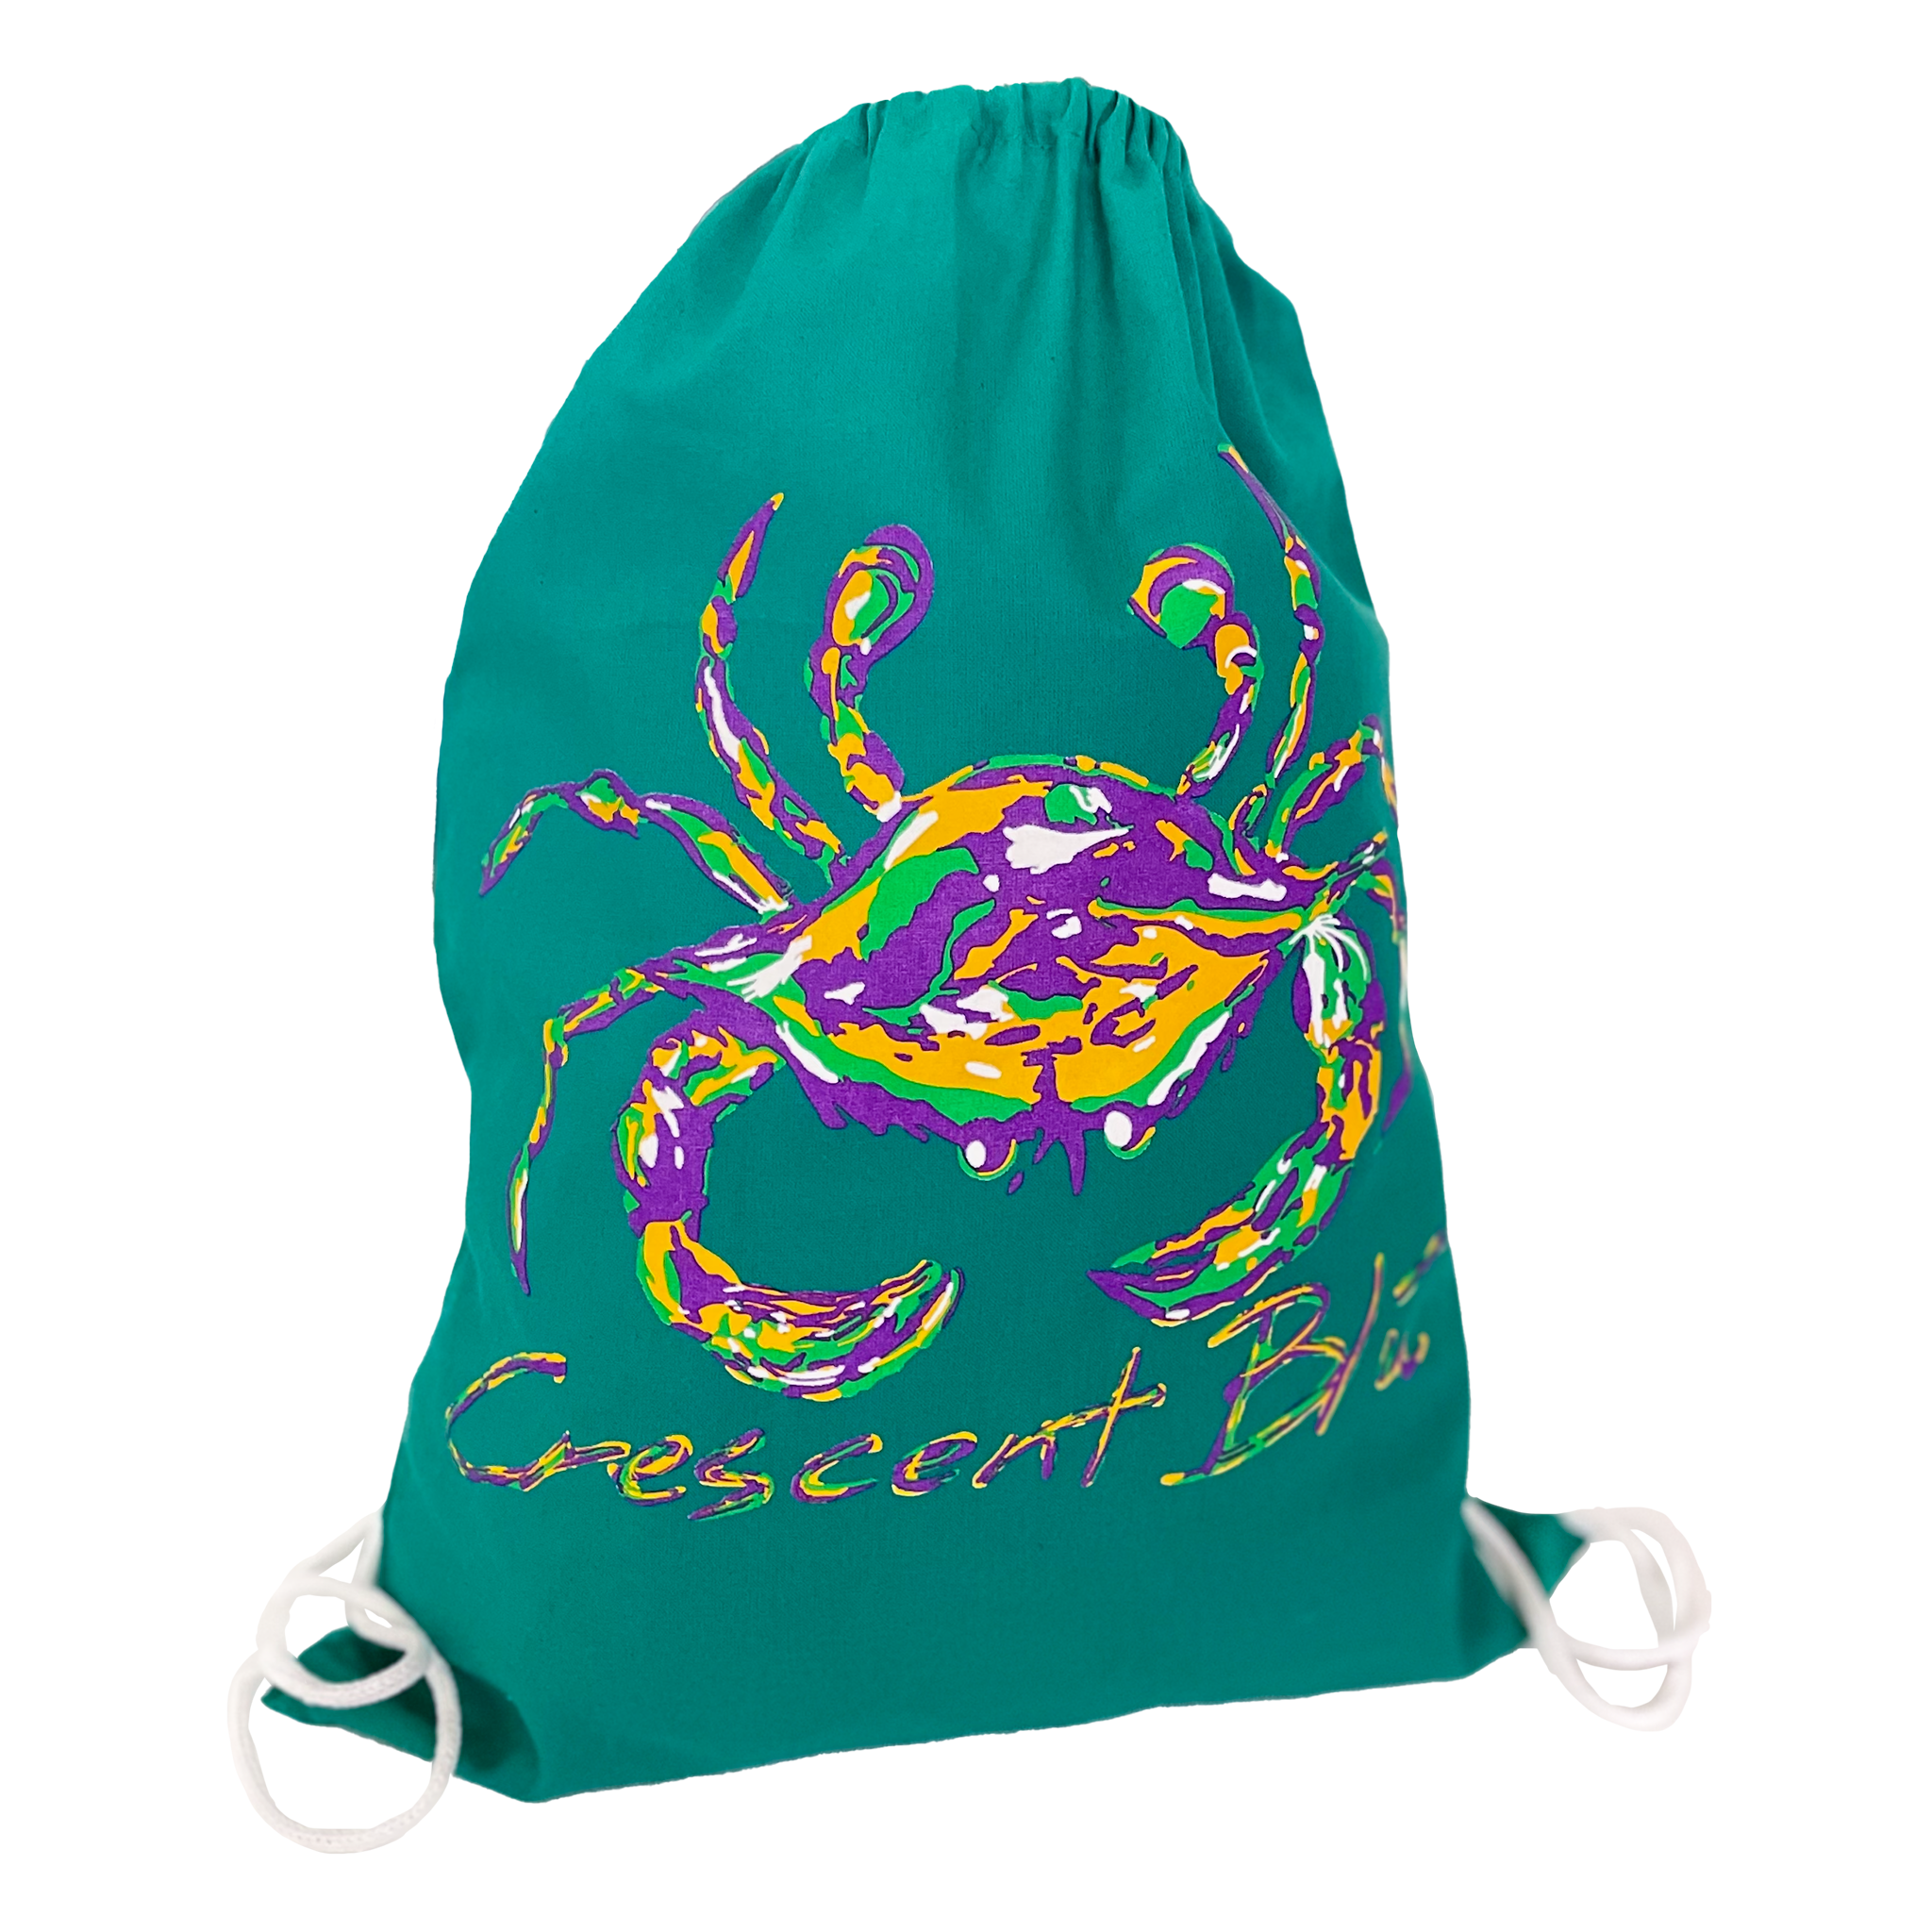 A Mardi Gras colored crab is on the front of a stuffed green drawstring bag with white contrasting drawstring cords.